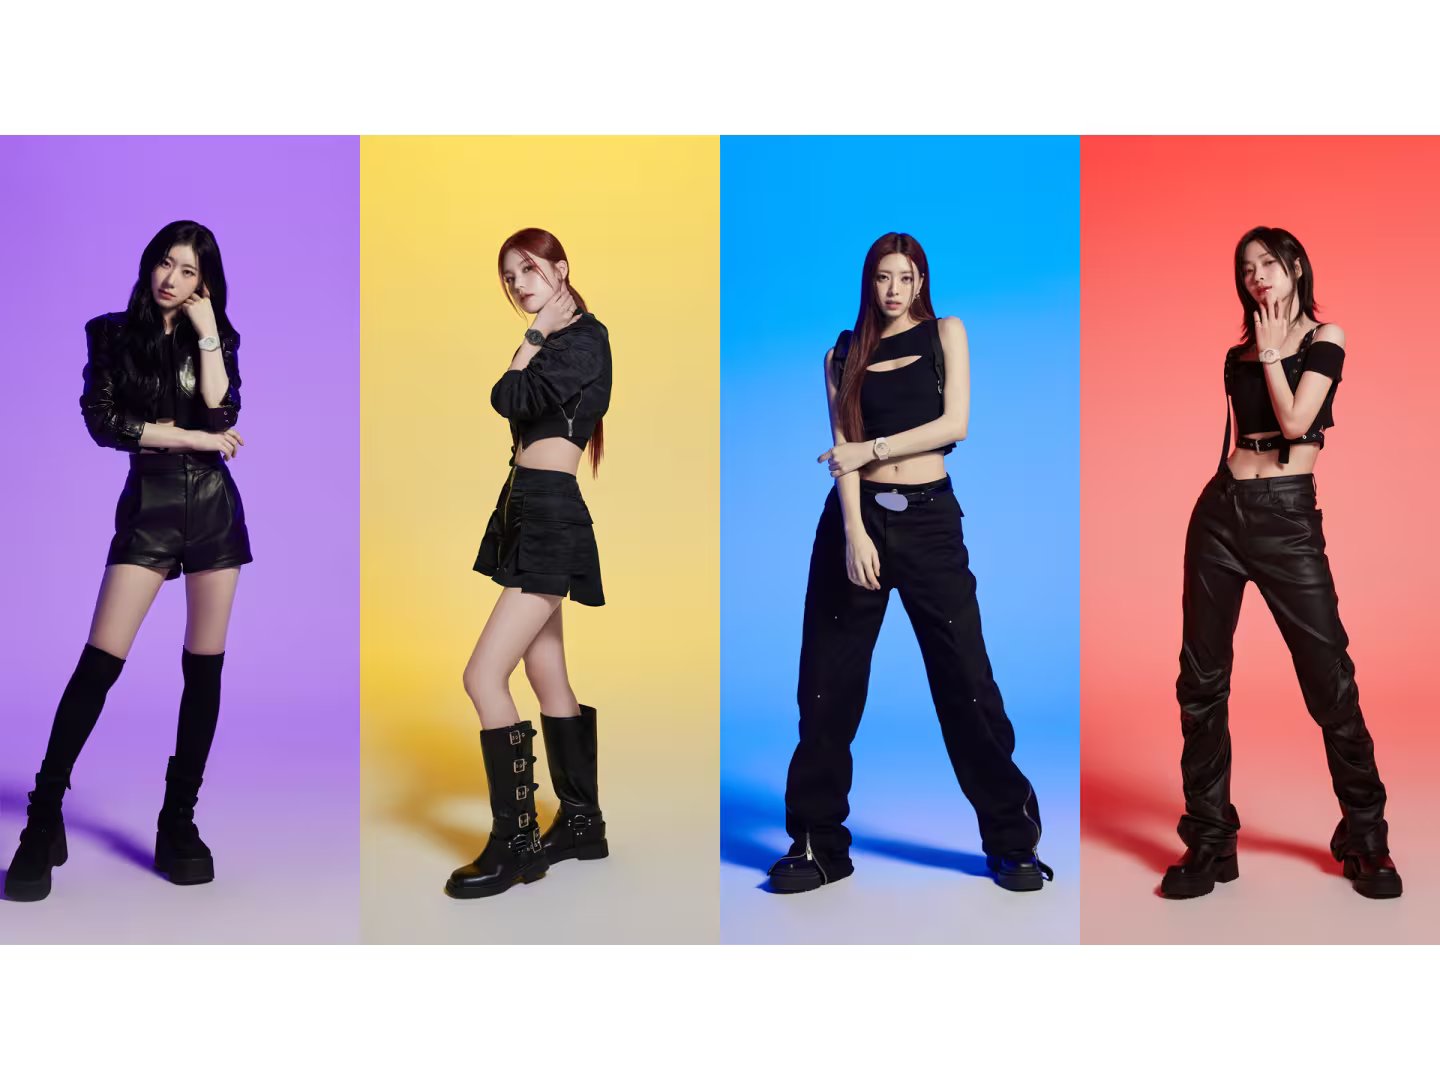 Casio to Release G-SHOCK Collaboration Watches Featuring K-POP Girl Group , ITZY